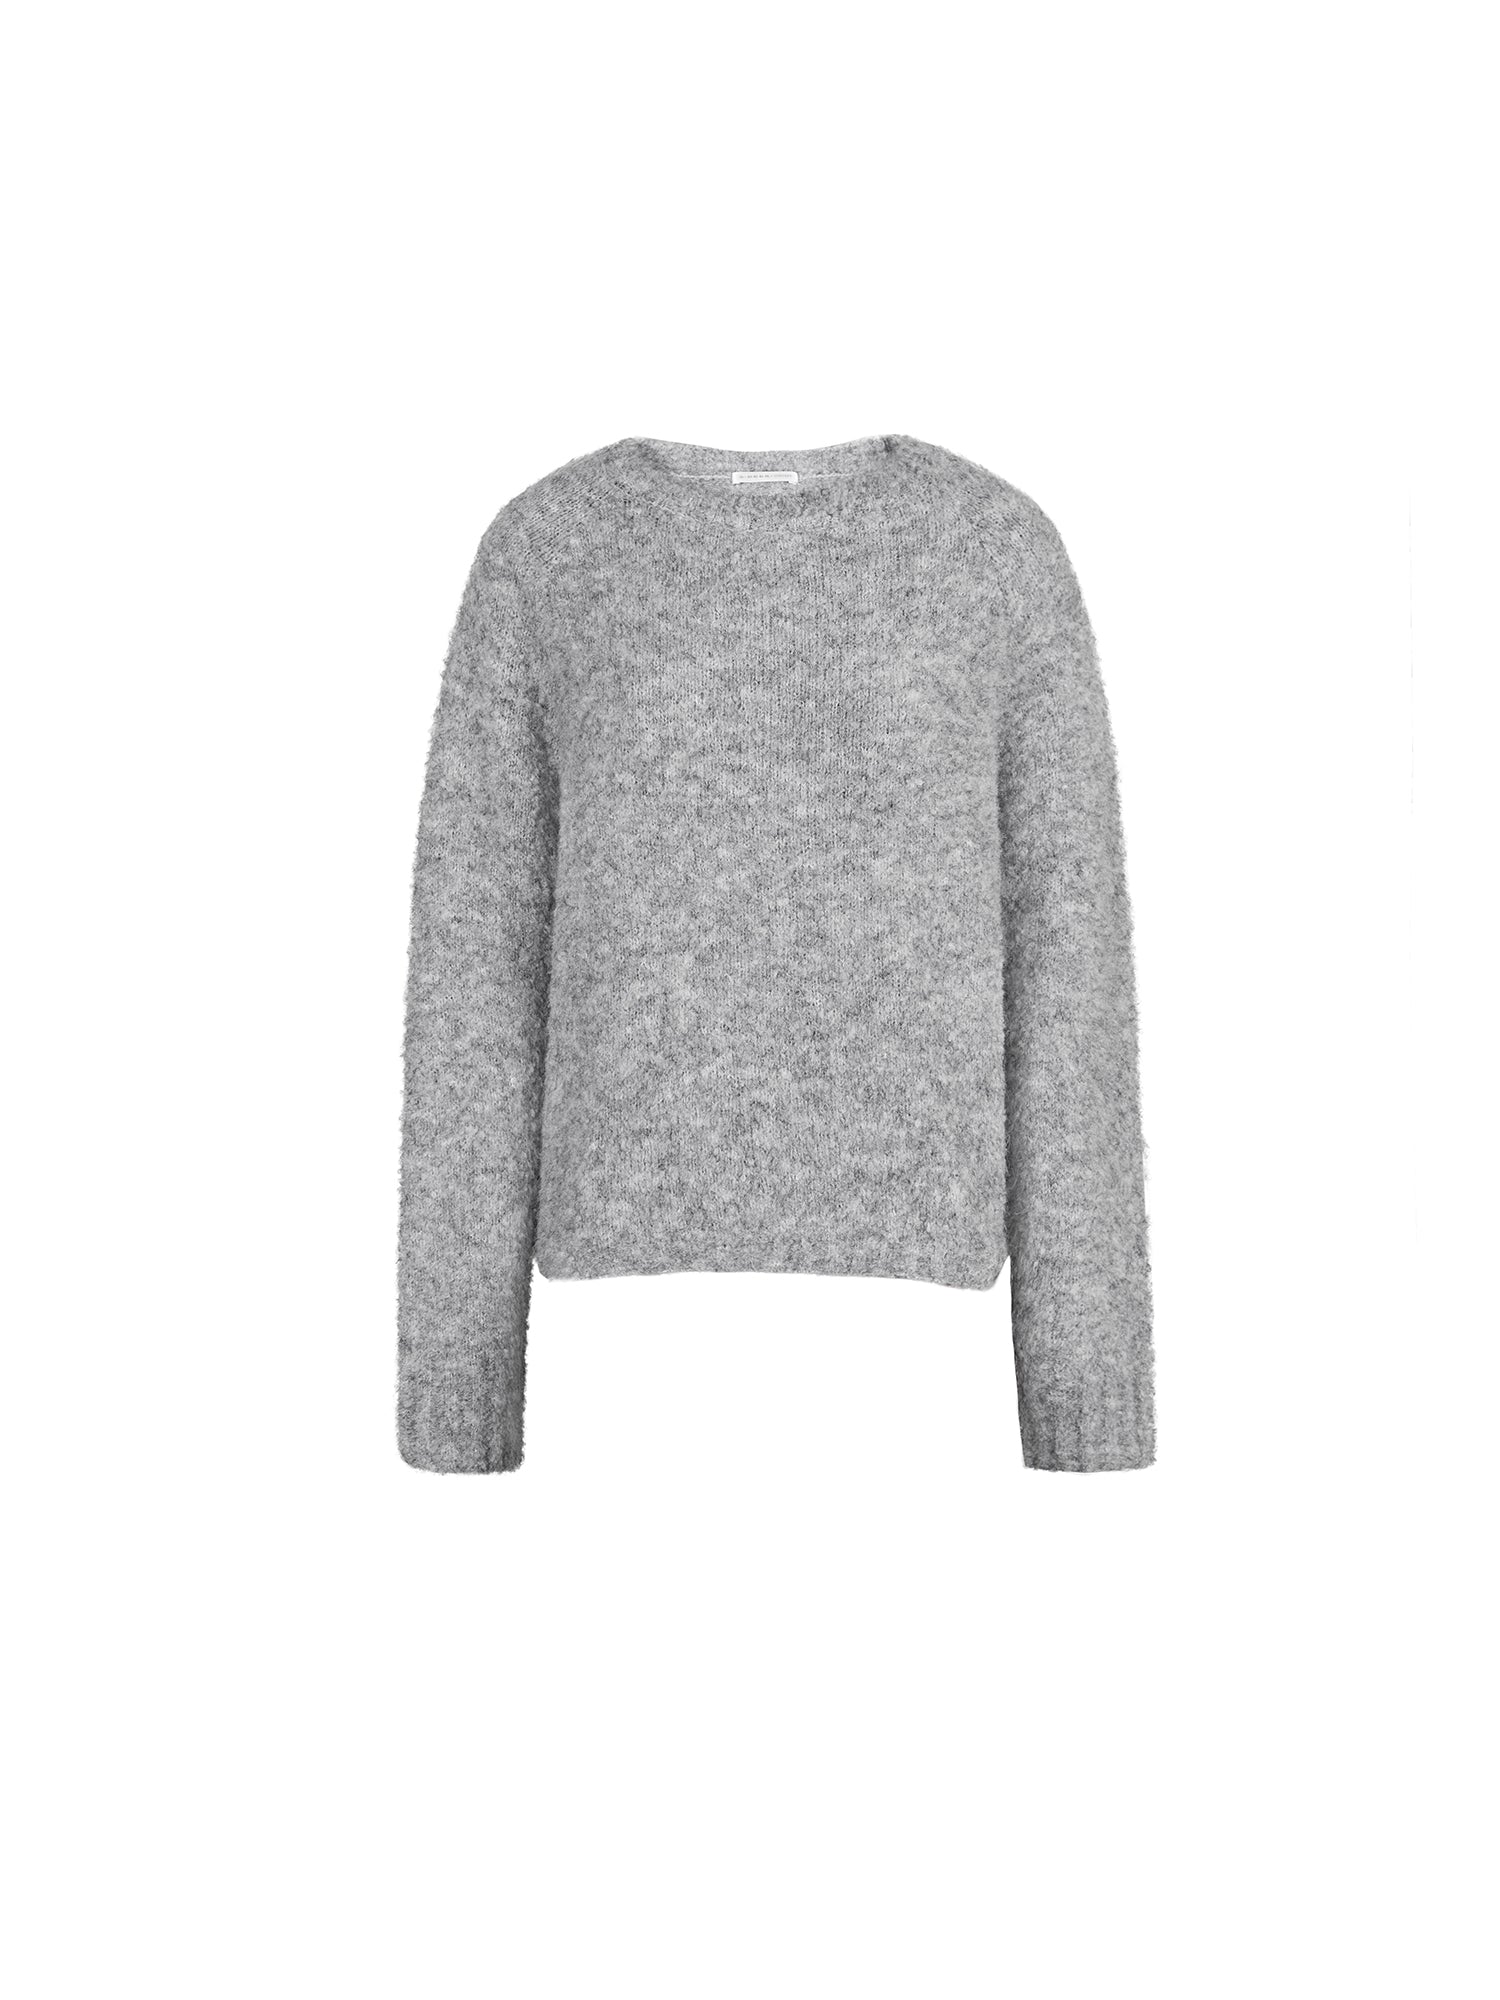 Casual Round Neck Textured Wool Thick Gray Sweater